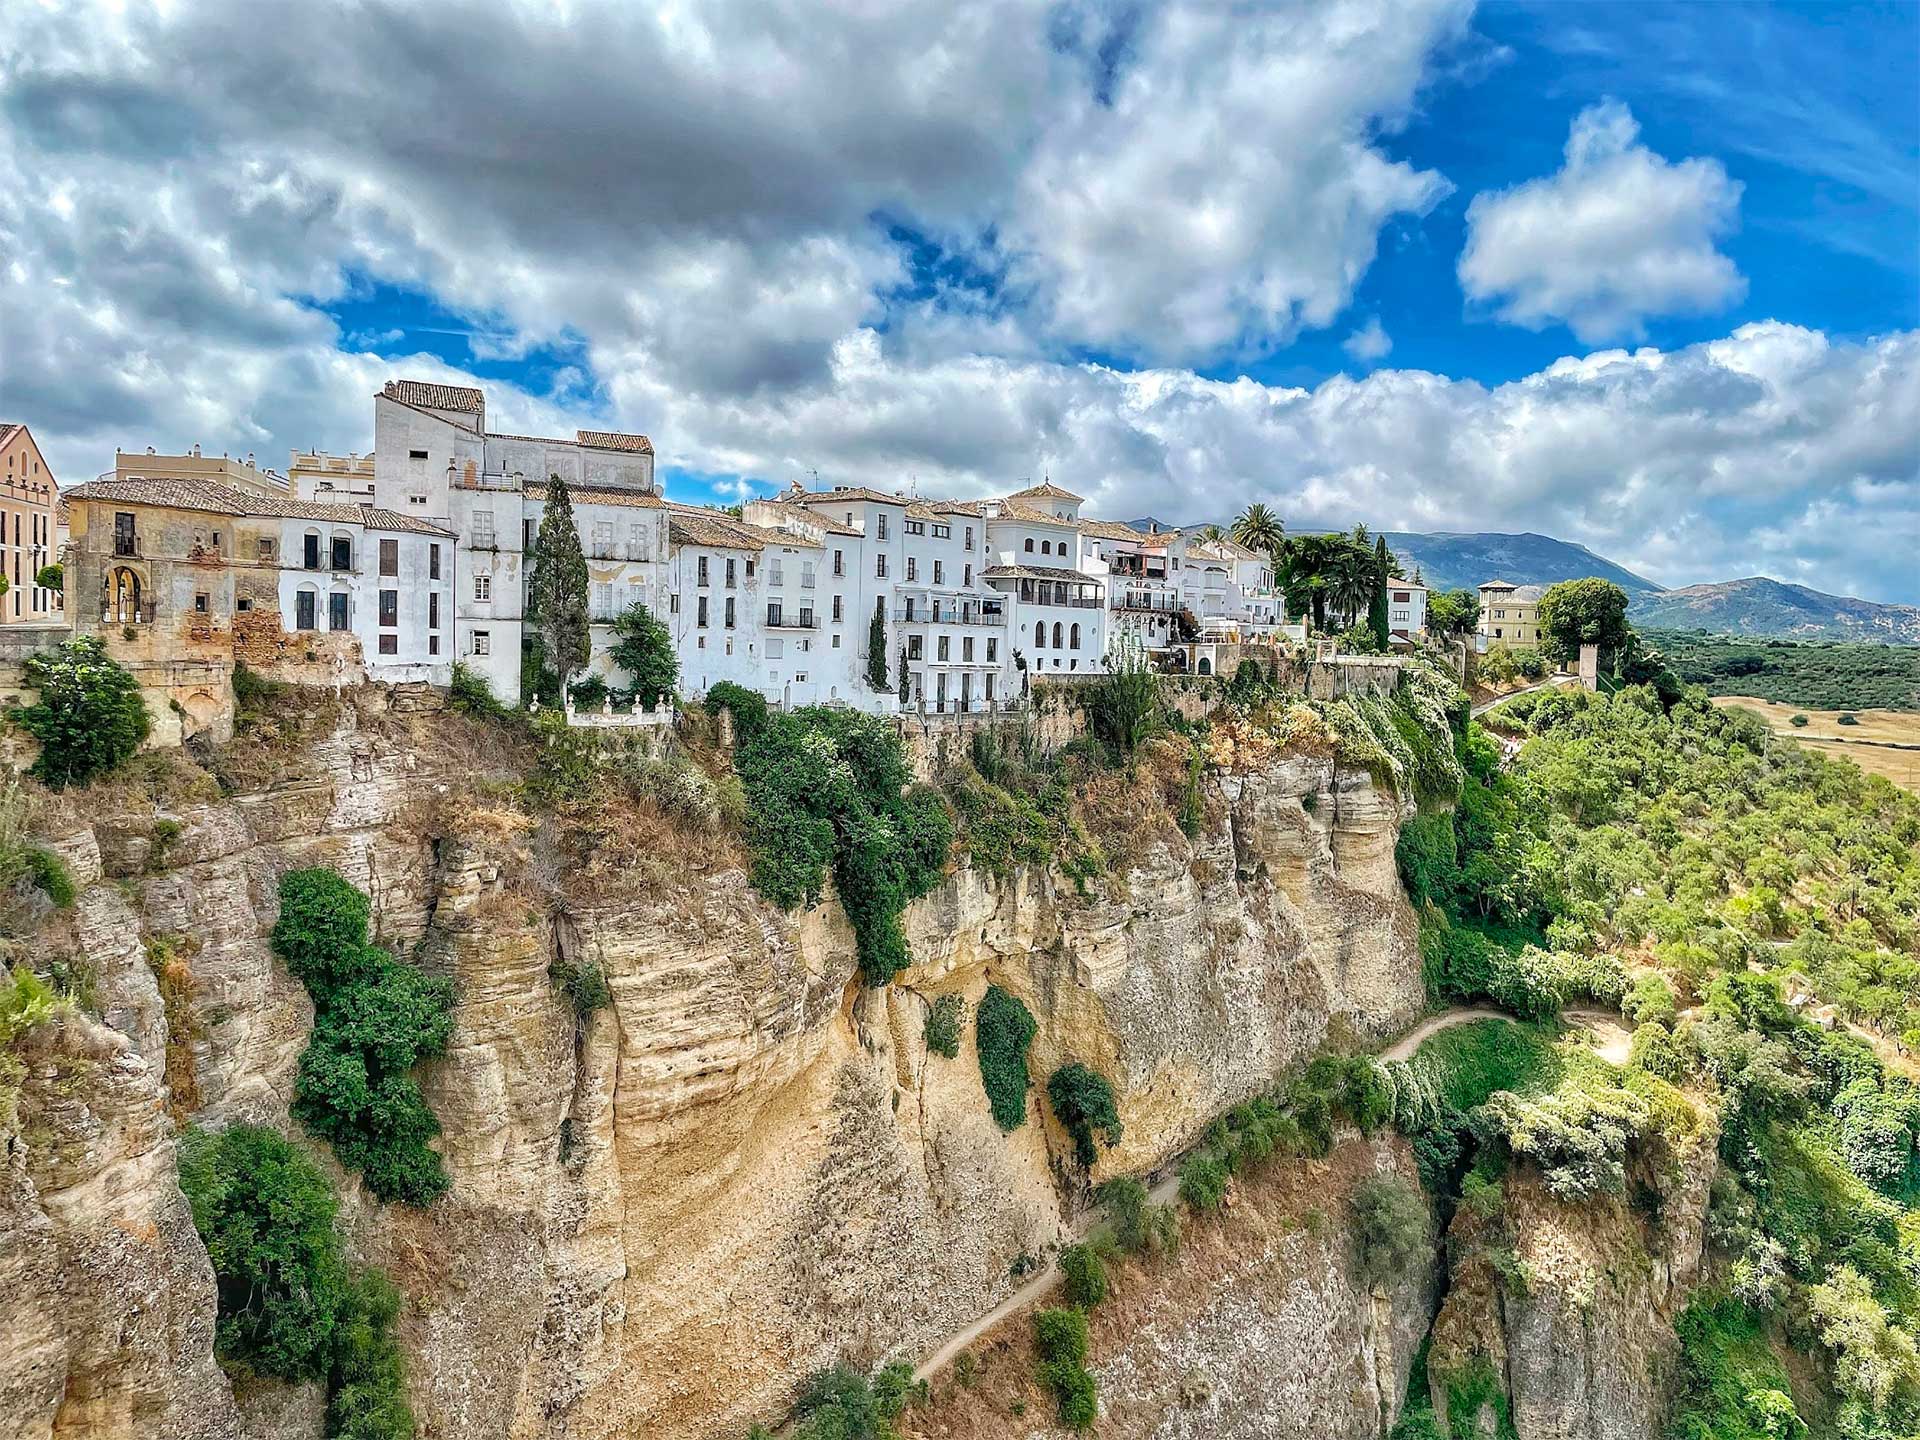 Visit Ronda in a memorable private tour with CÚRATE Trips by Paladar y Tomar